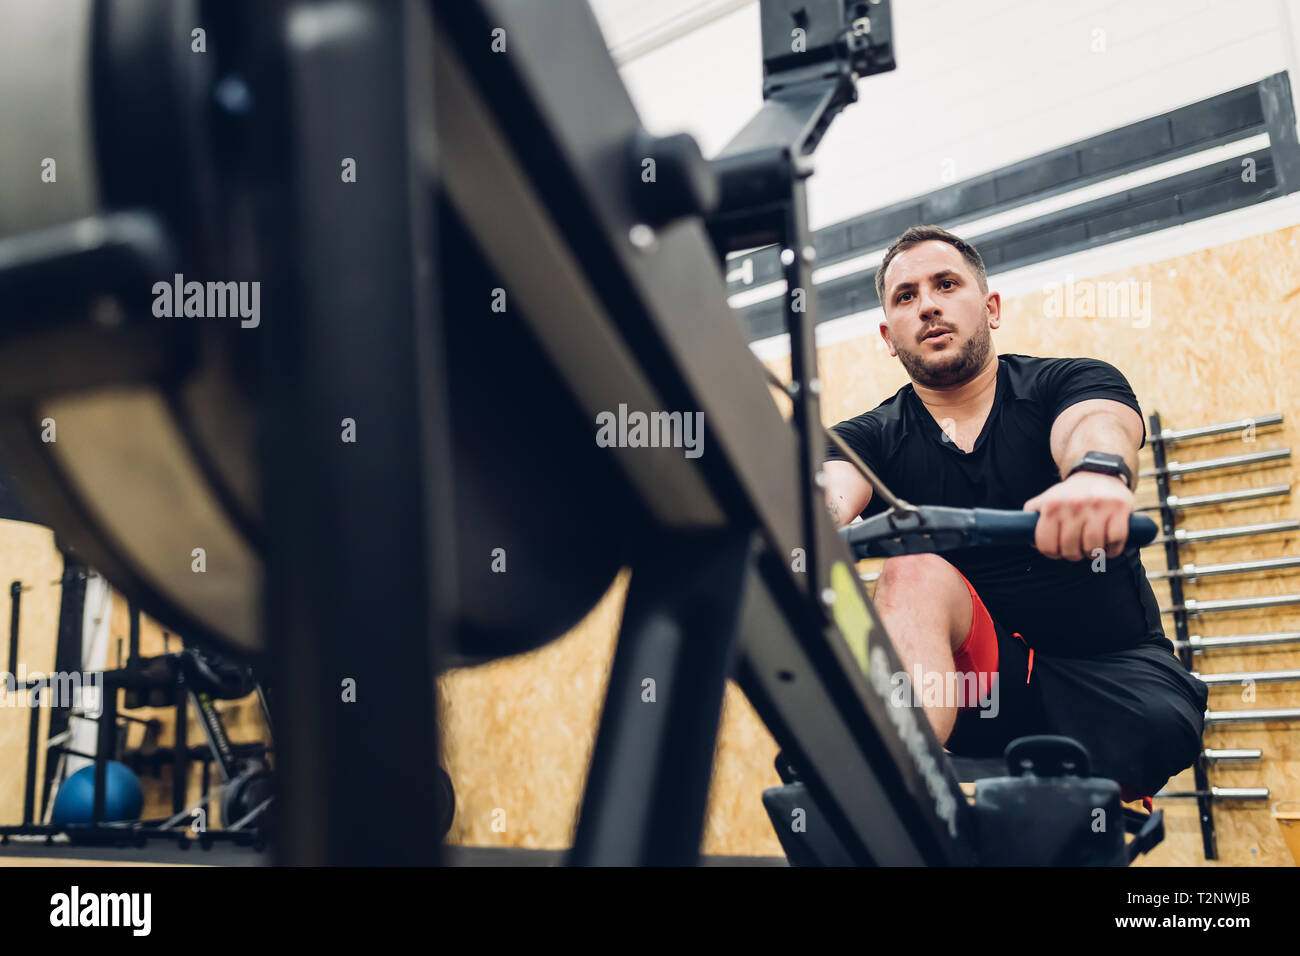 Man with disability using rowing machine in gym Stock Photo